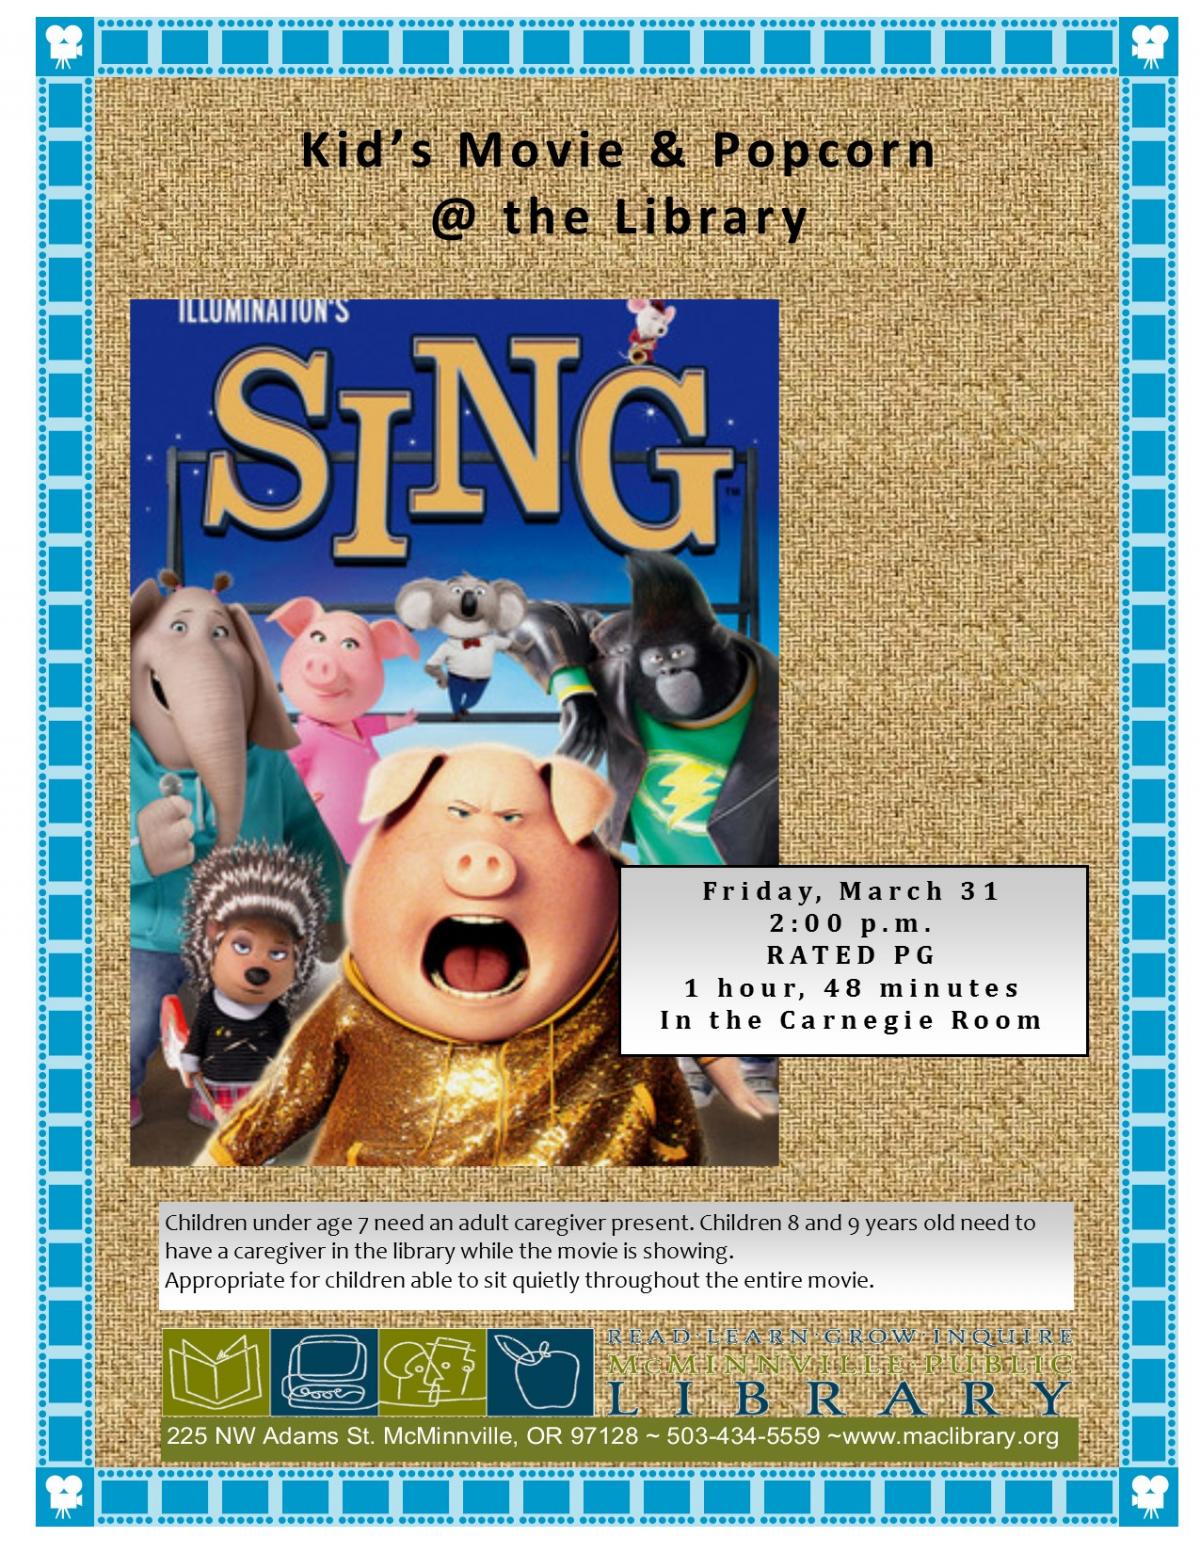 Kid's Movie Friday, March 31 at 2pm in the Carnegie Room 